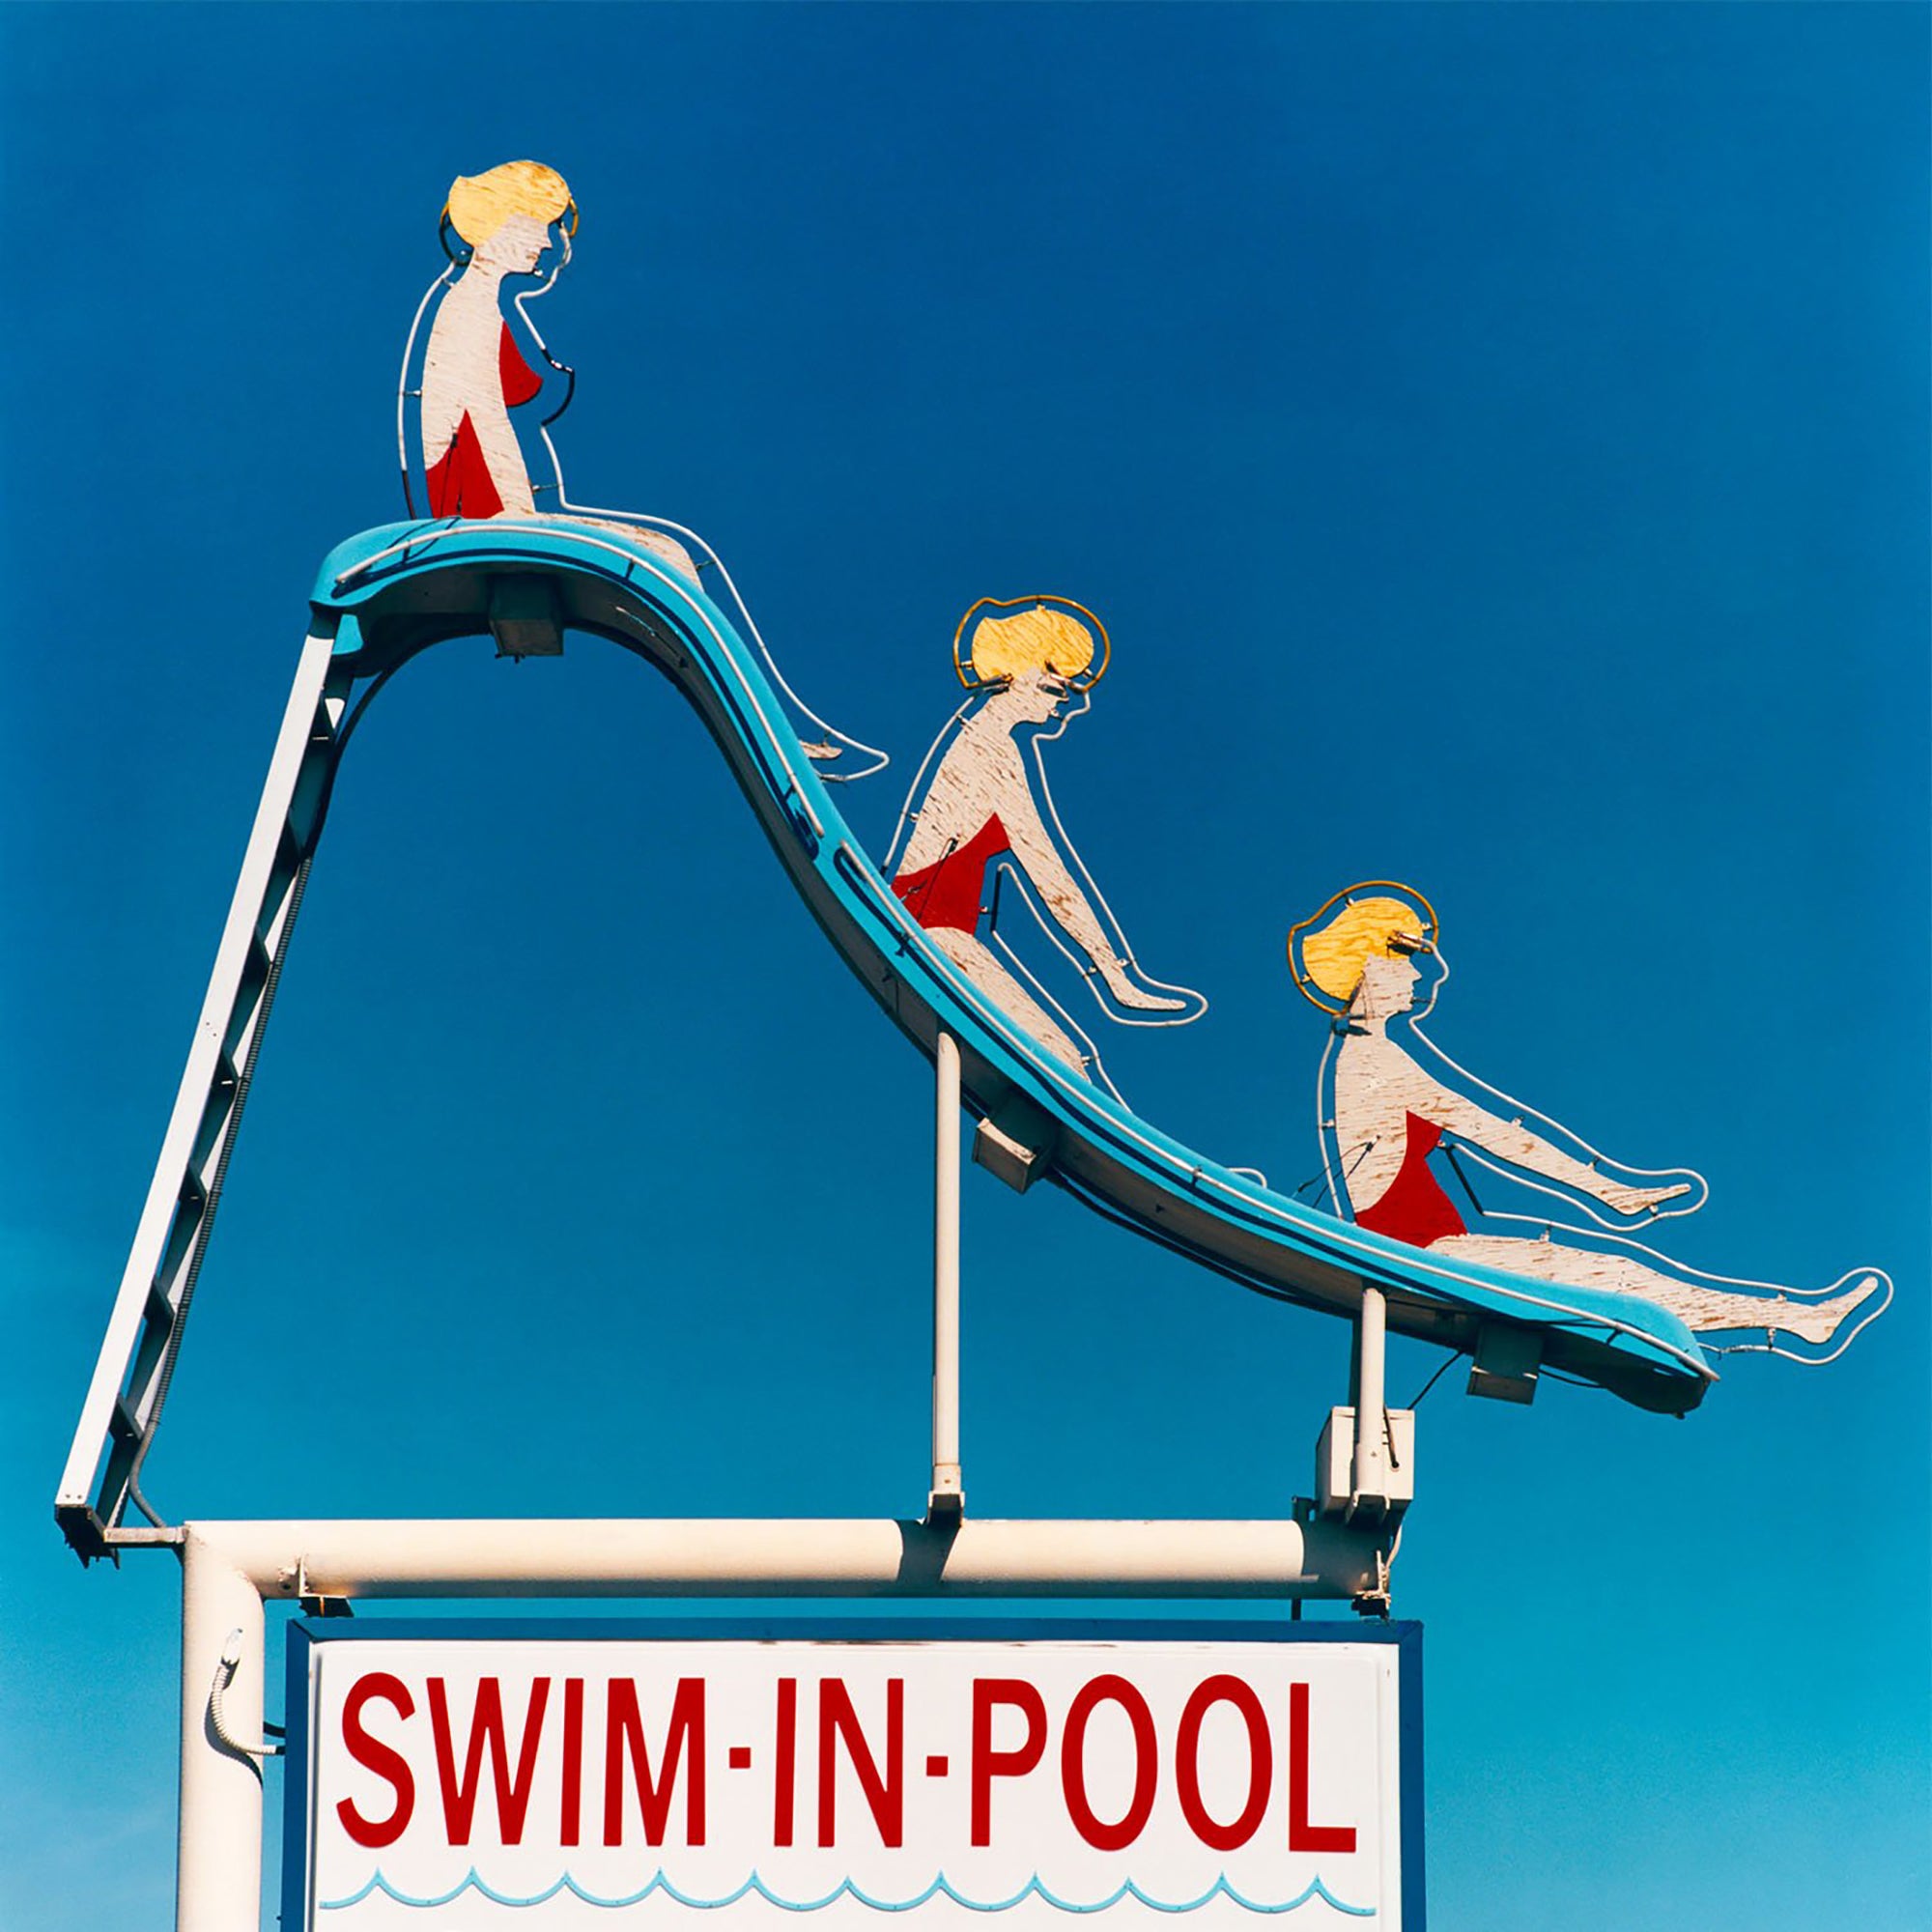 Swim-in-Pool, blue red and yellow pop art typography photograph by Richard Heeps. 